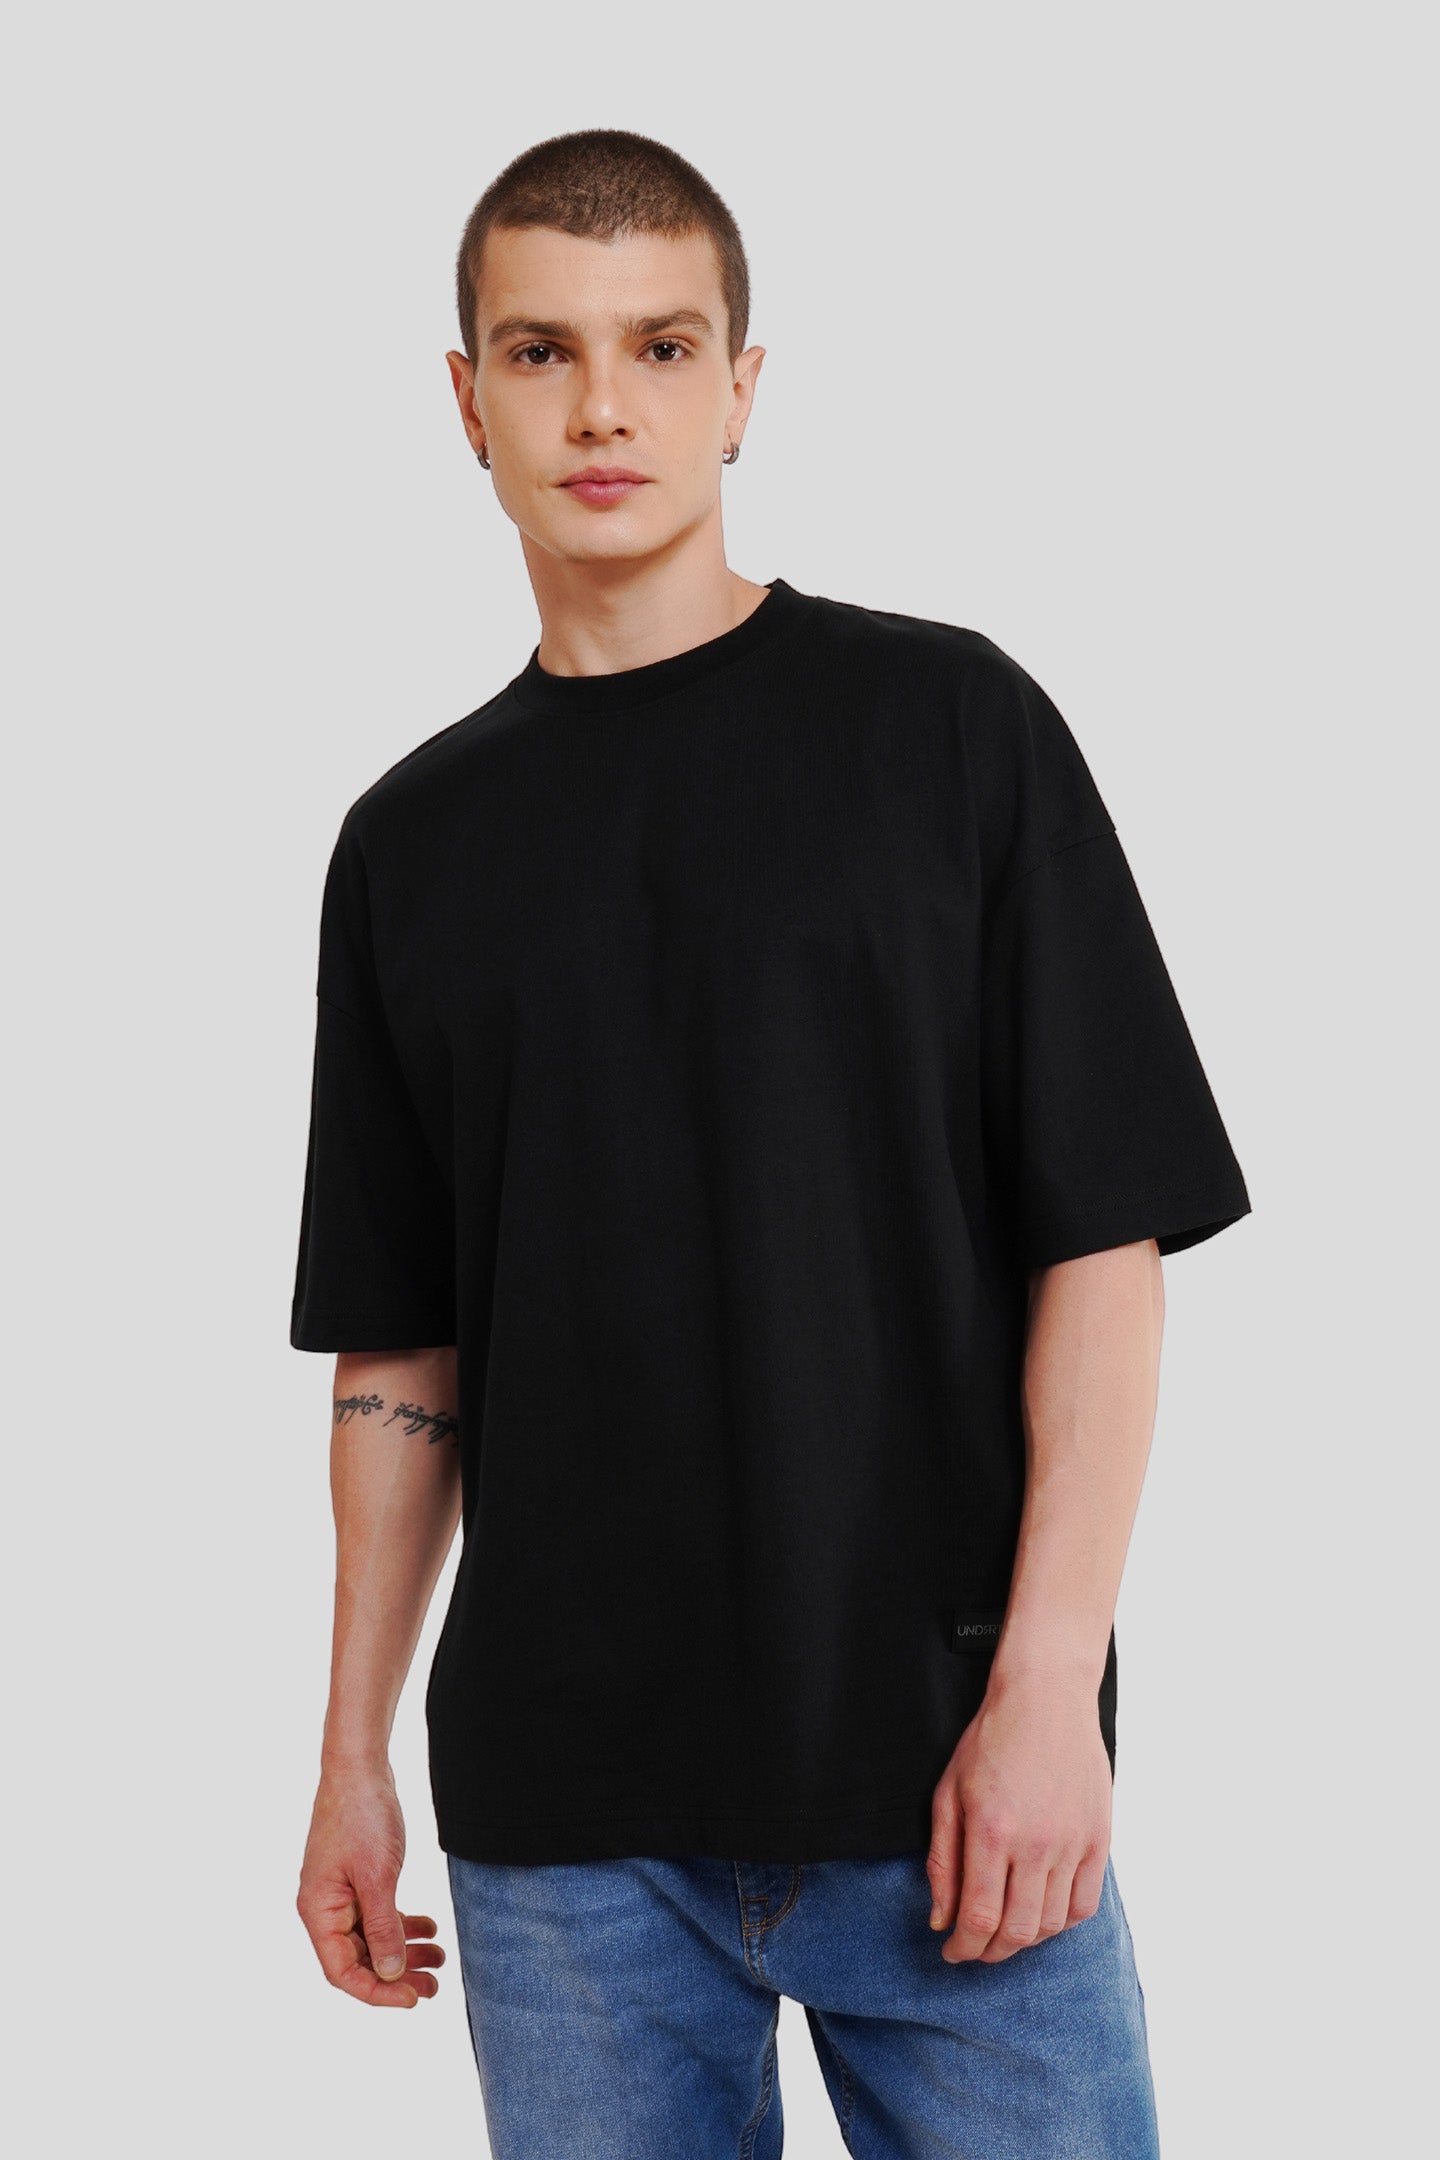 Underrated Club Teddy Black Baggy Fit T-Shirt Men Pic 2